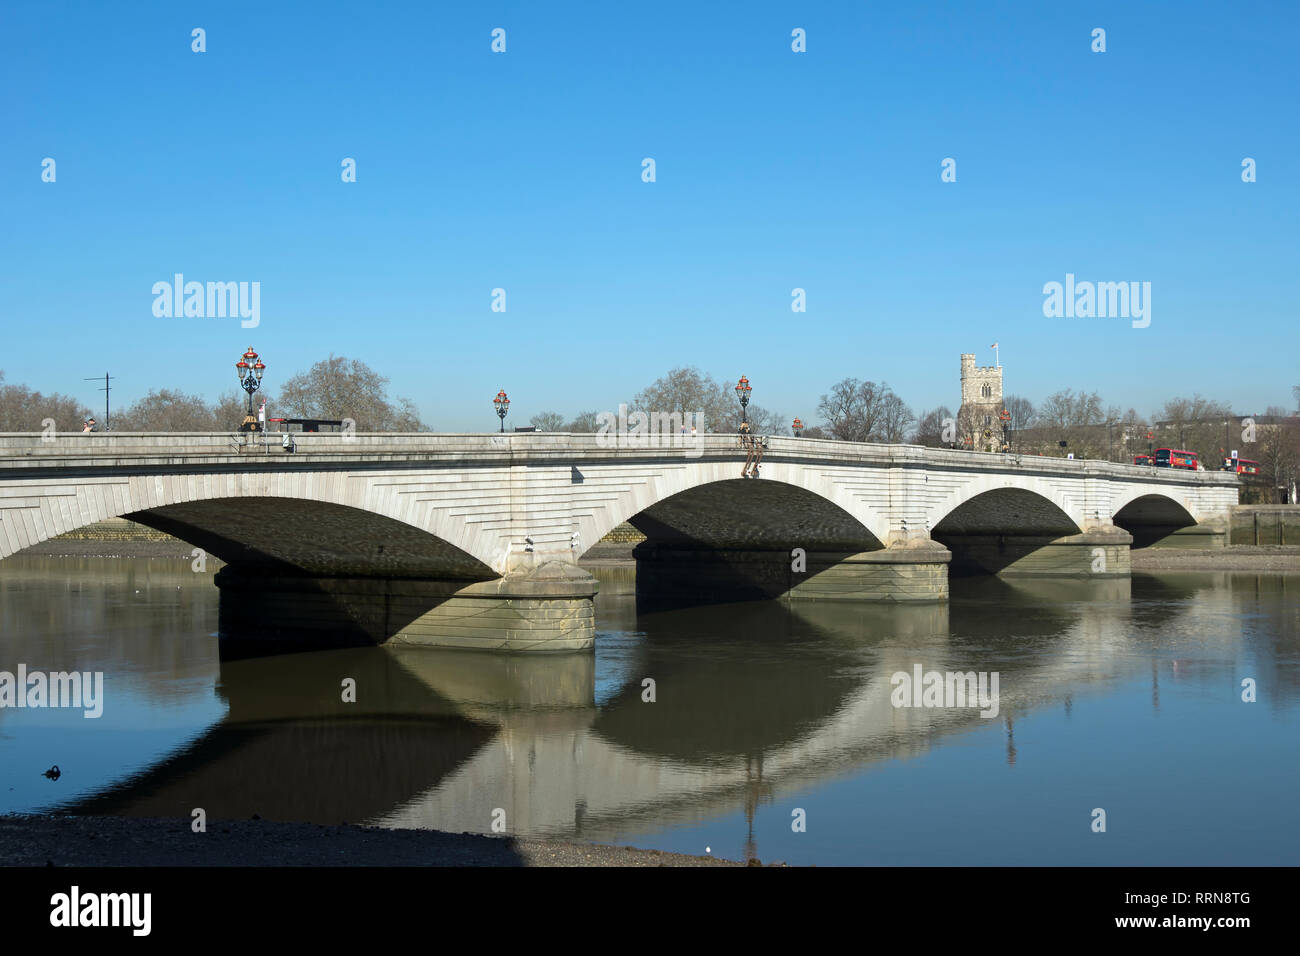 putney bridge, spanning the river thames between putney and fulham, london, england, the tower of all saints church in background Stock Photo